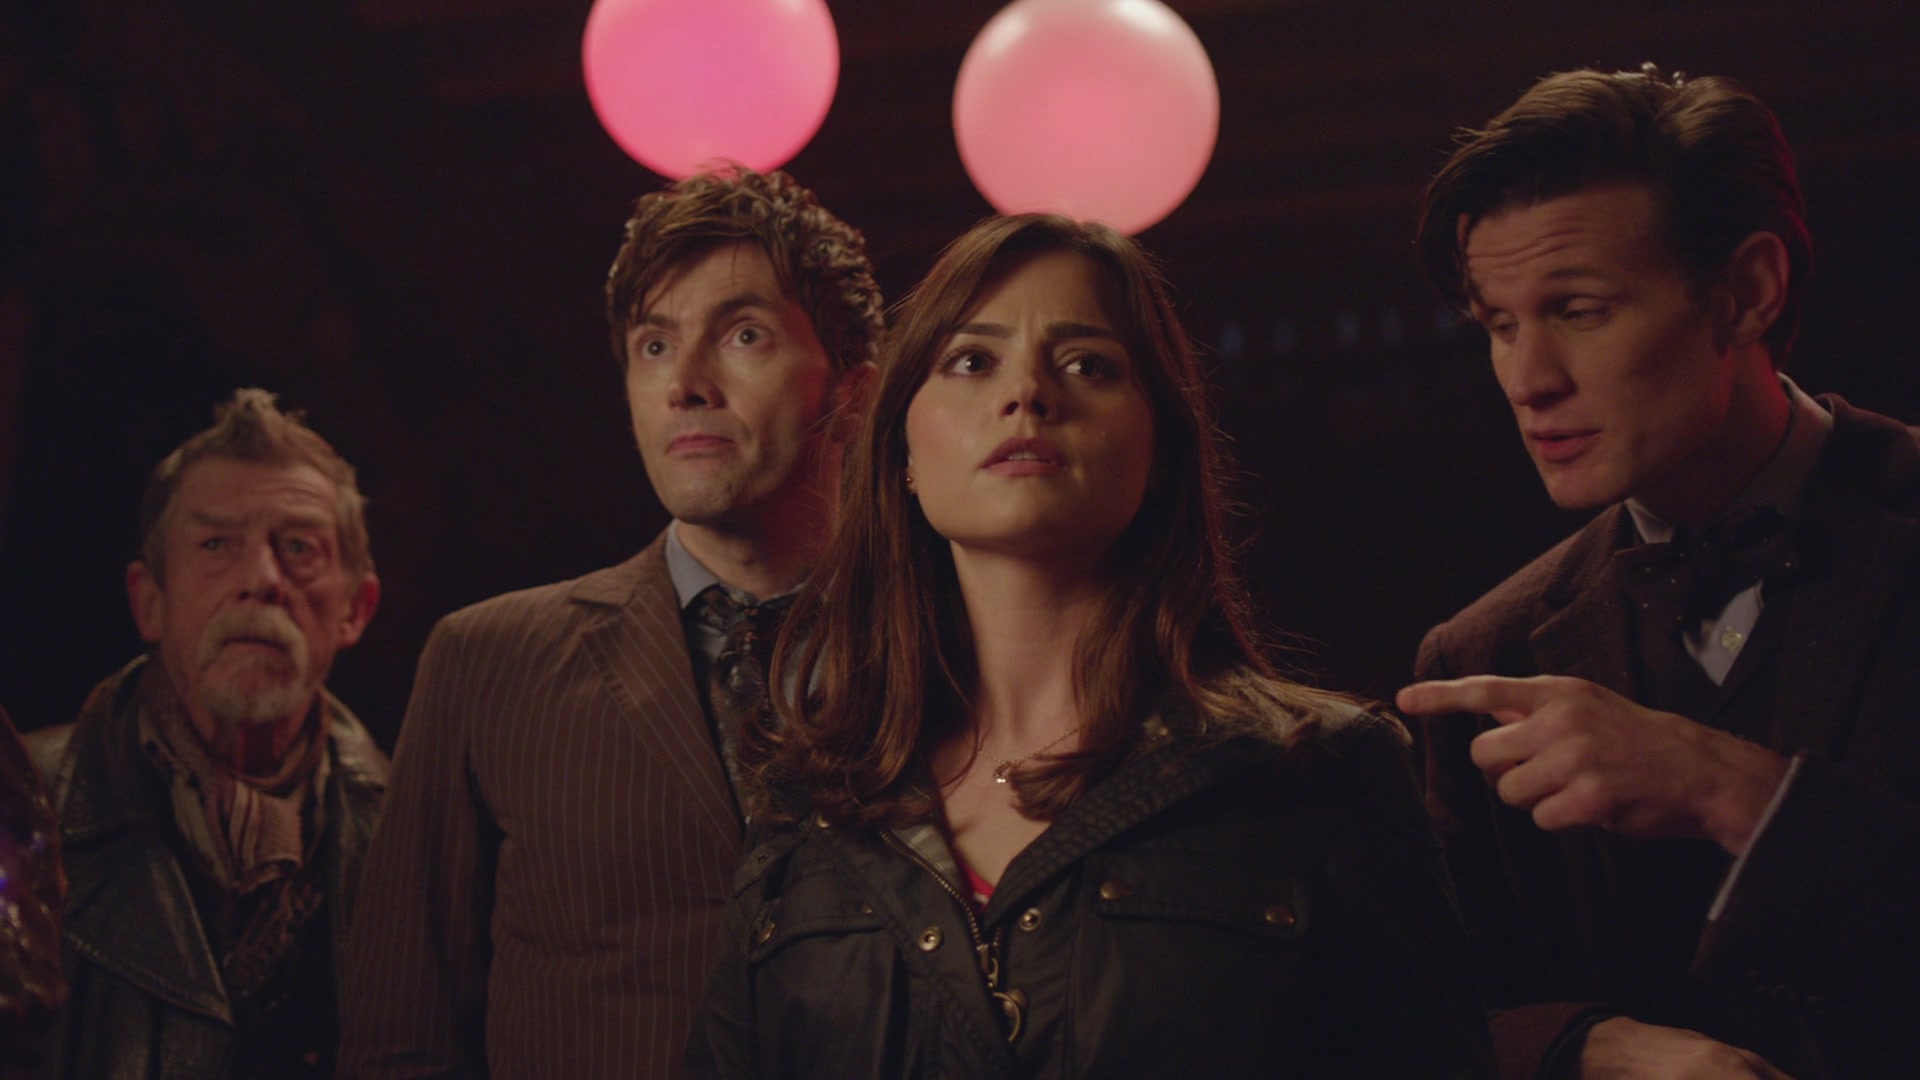 DayOfTheDoctor-Caps-0804.jpg